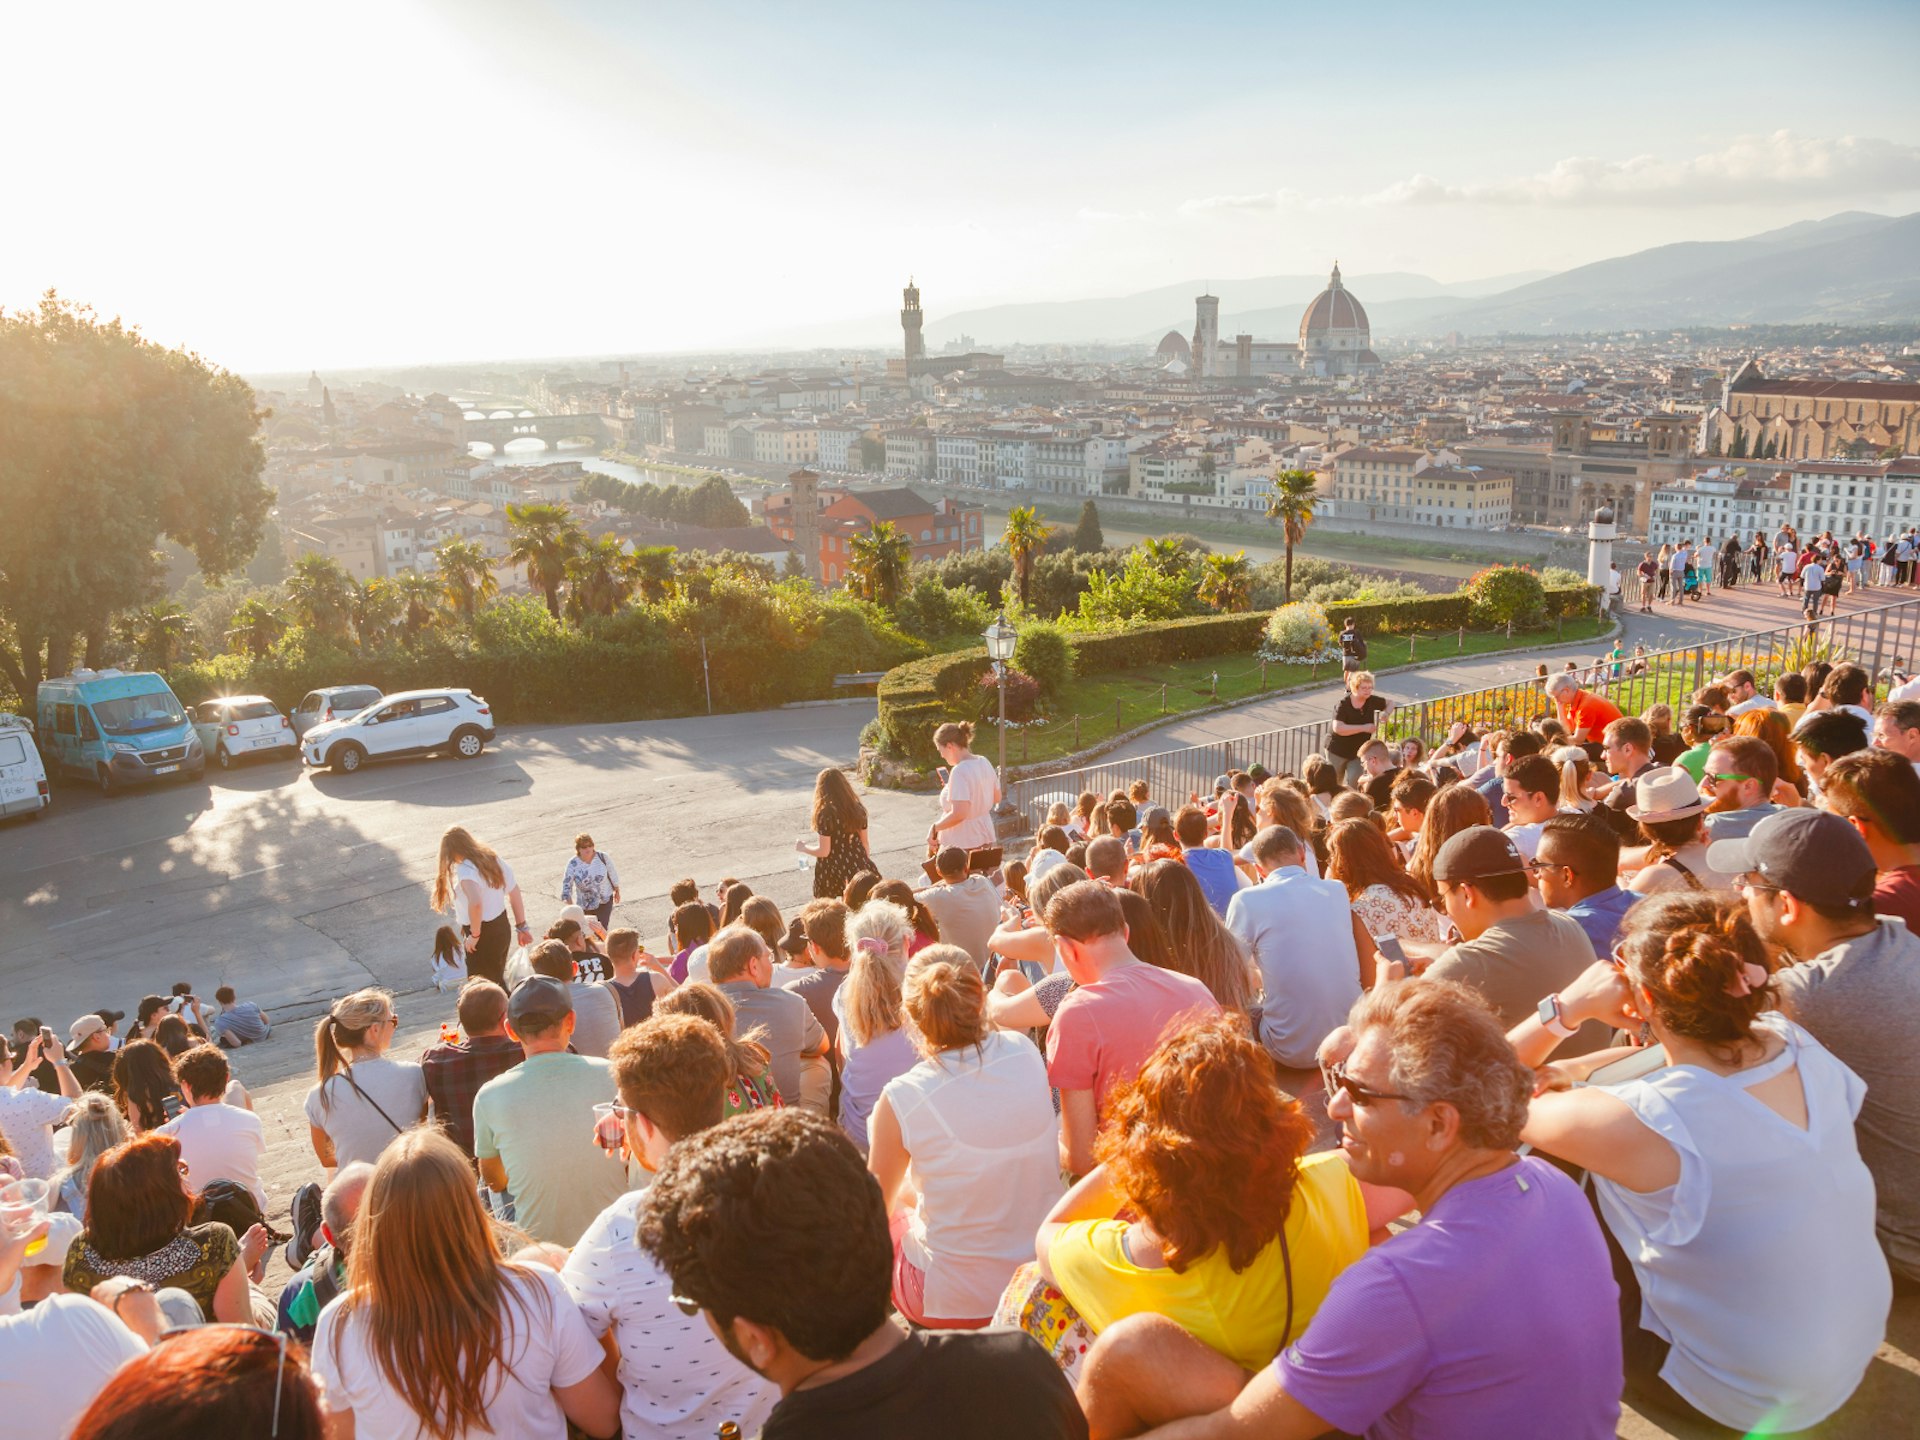 Crowds gather to watch the sun set from Piazzale Michelangelo. Little do they know the real show starts once the night is in full effect